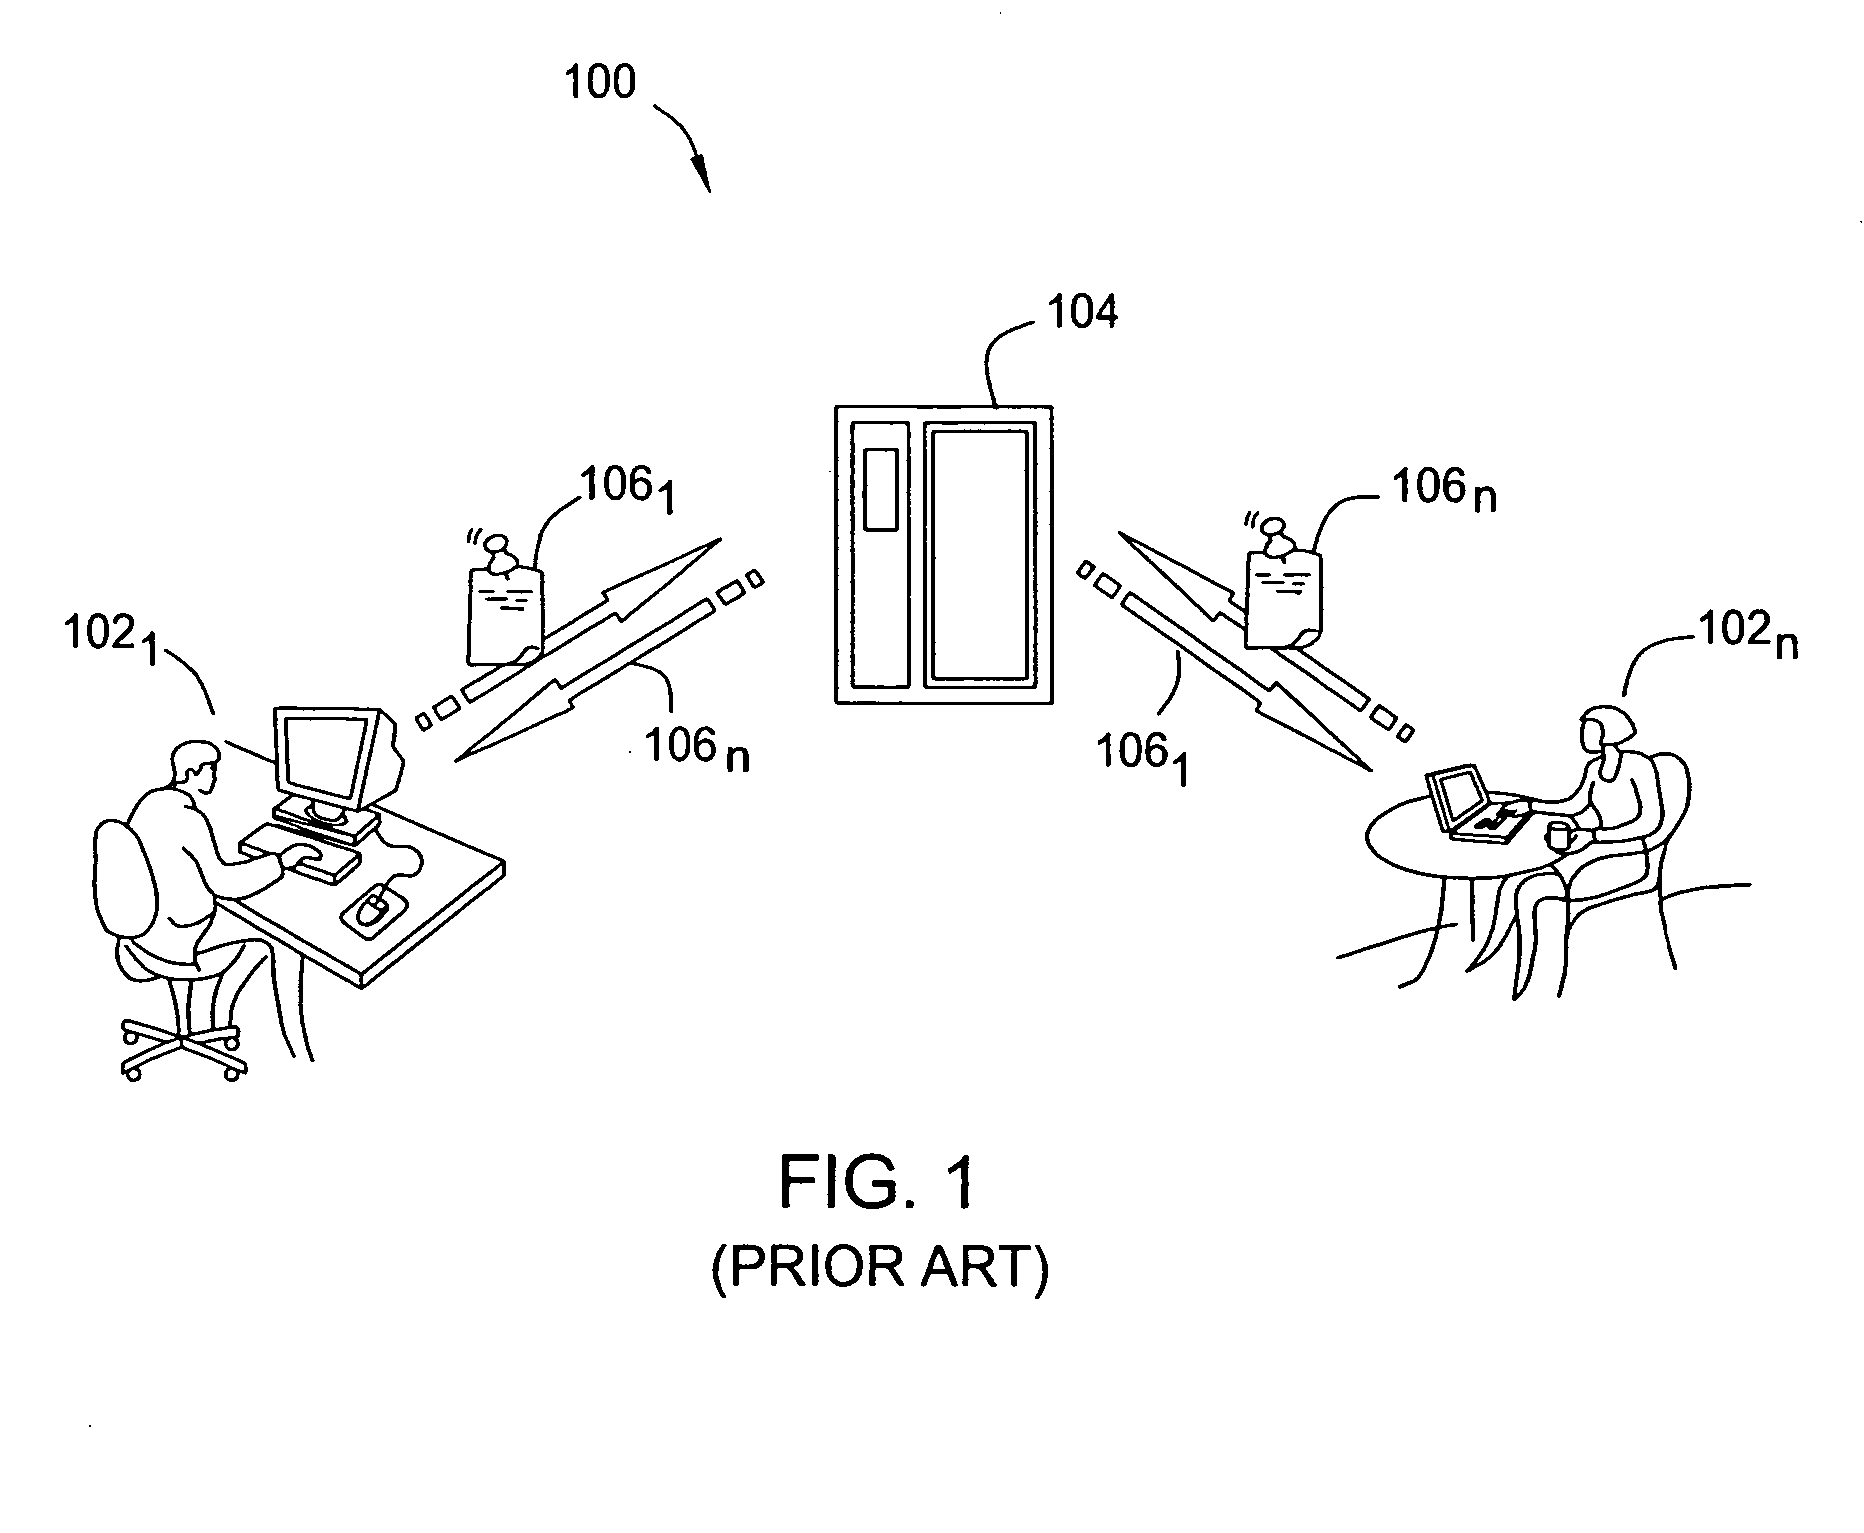 Method and apparatus for user moderation of online chat rooms